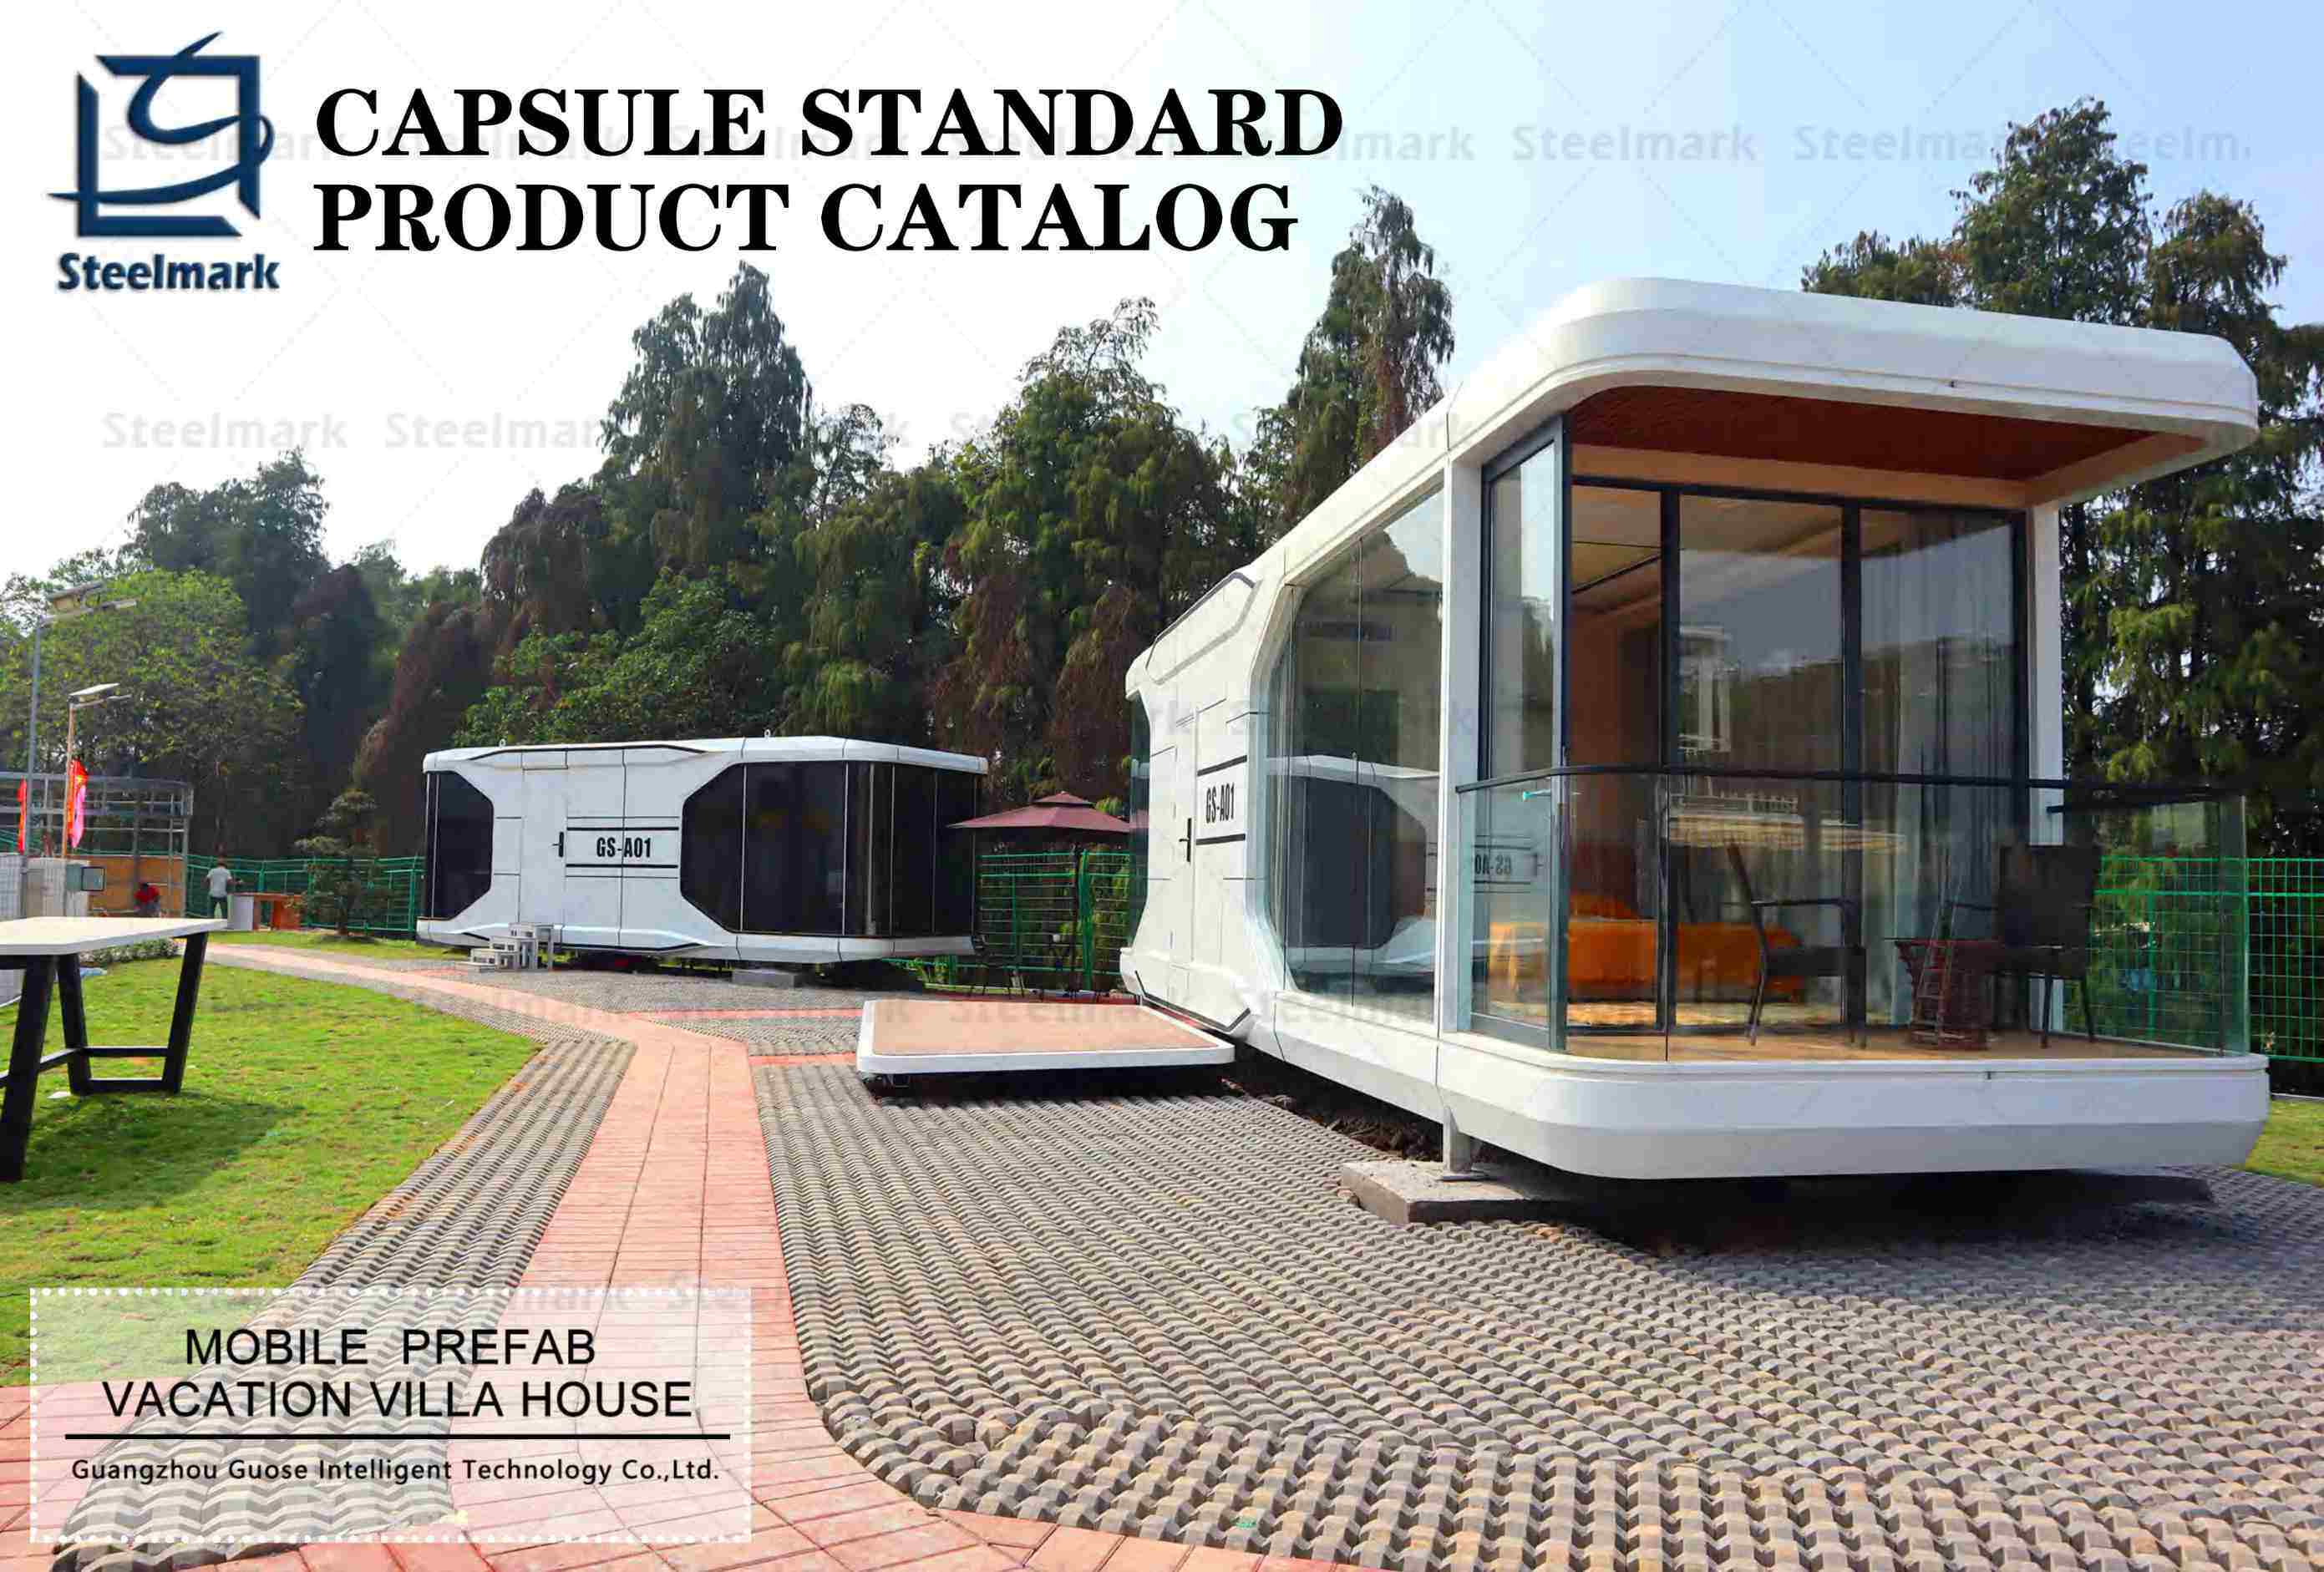 image_1684230840_2023-Space-Capsule-House-Catalogue_00